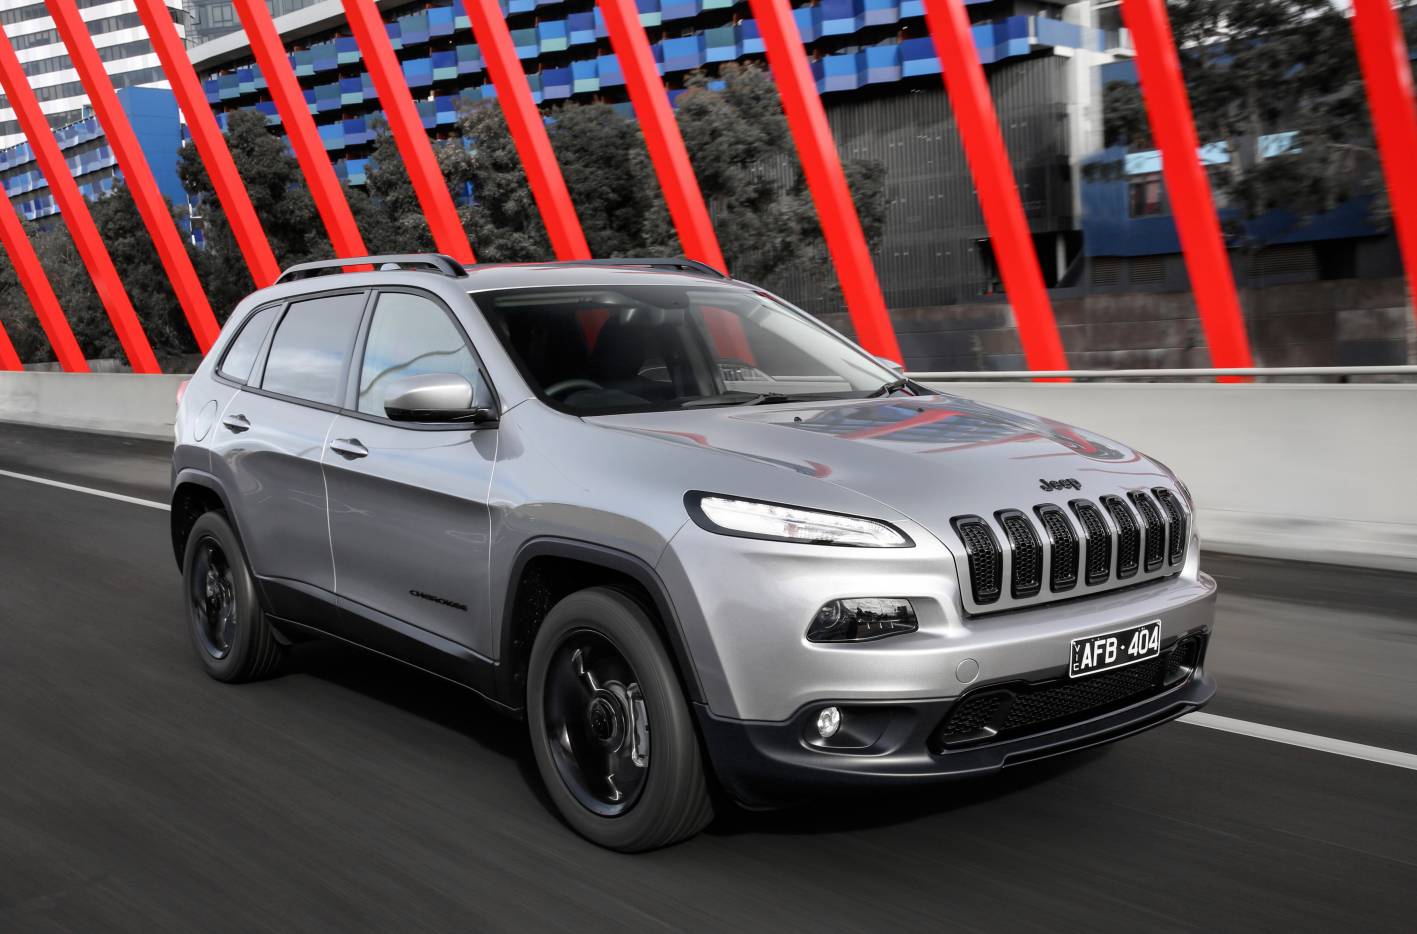 Jeep Cherokee & Renegade recalled, potential power loss